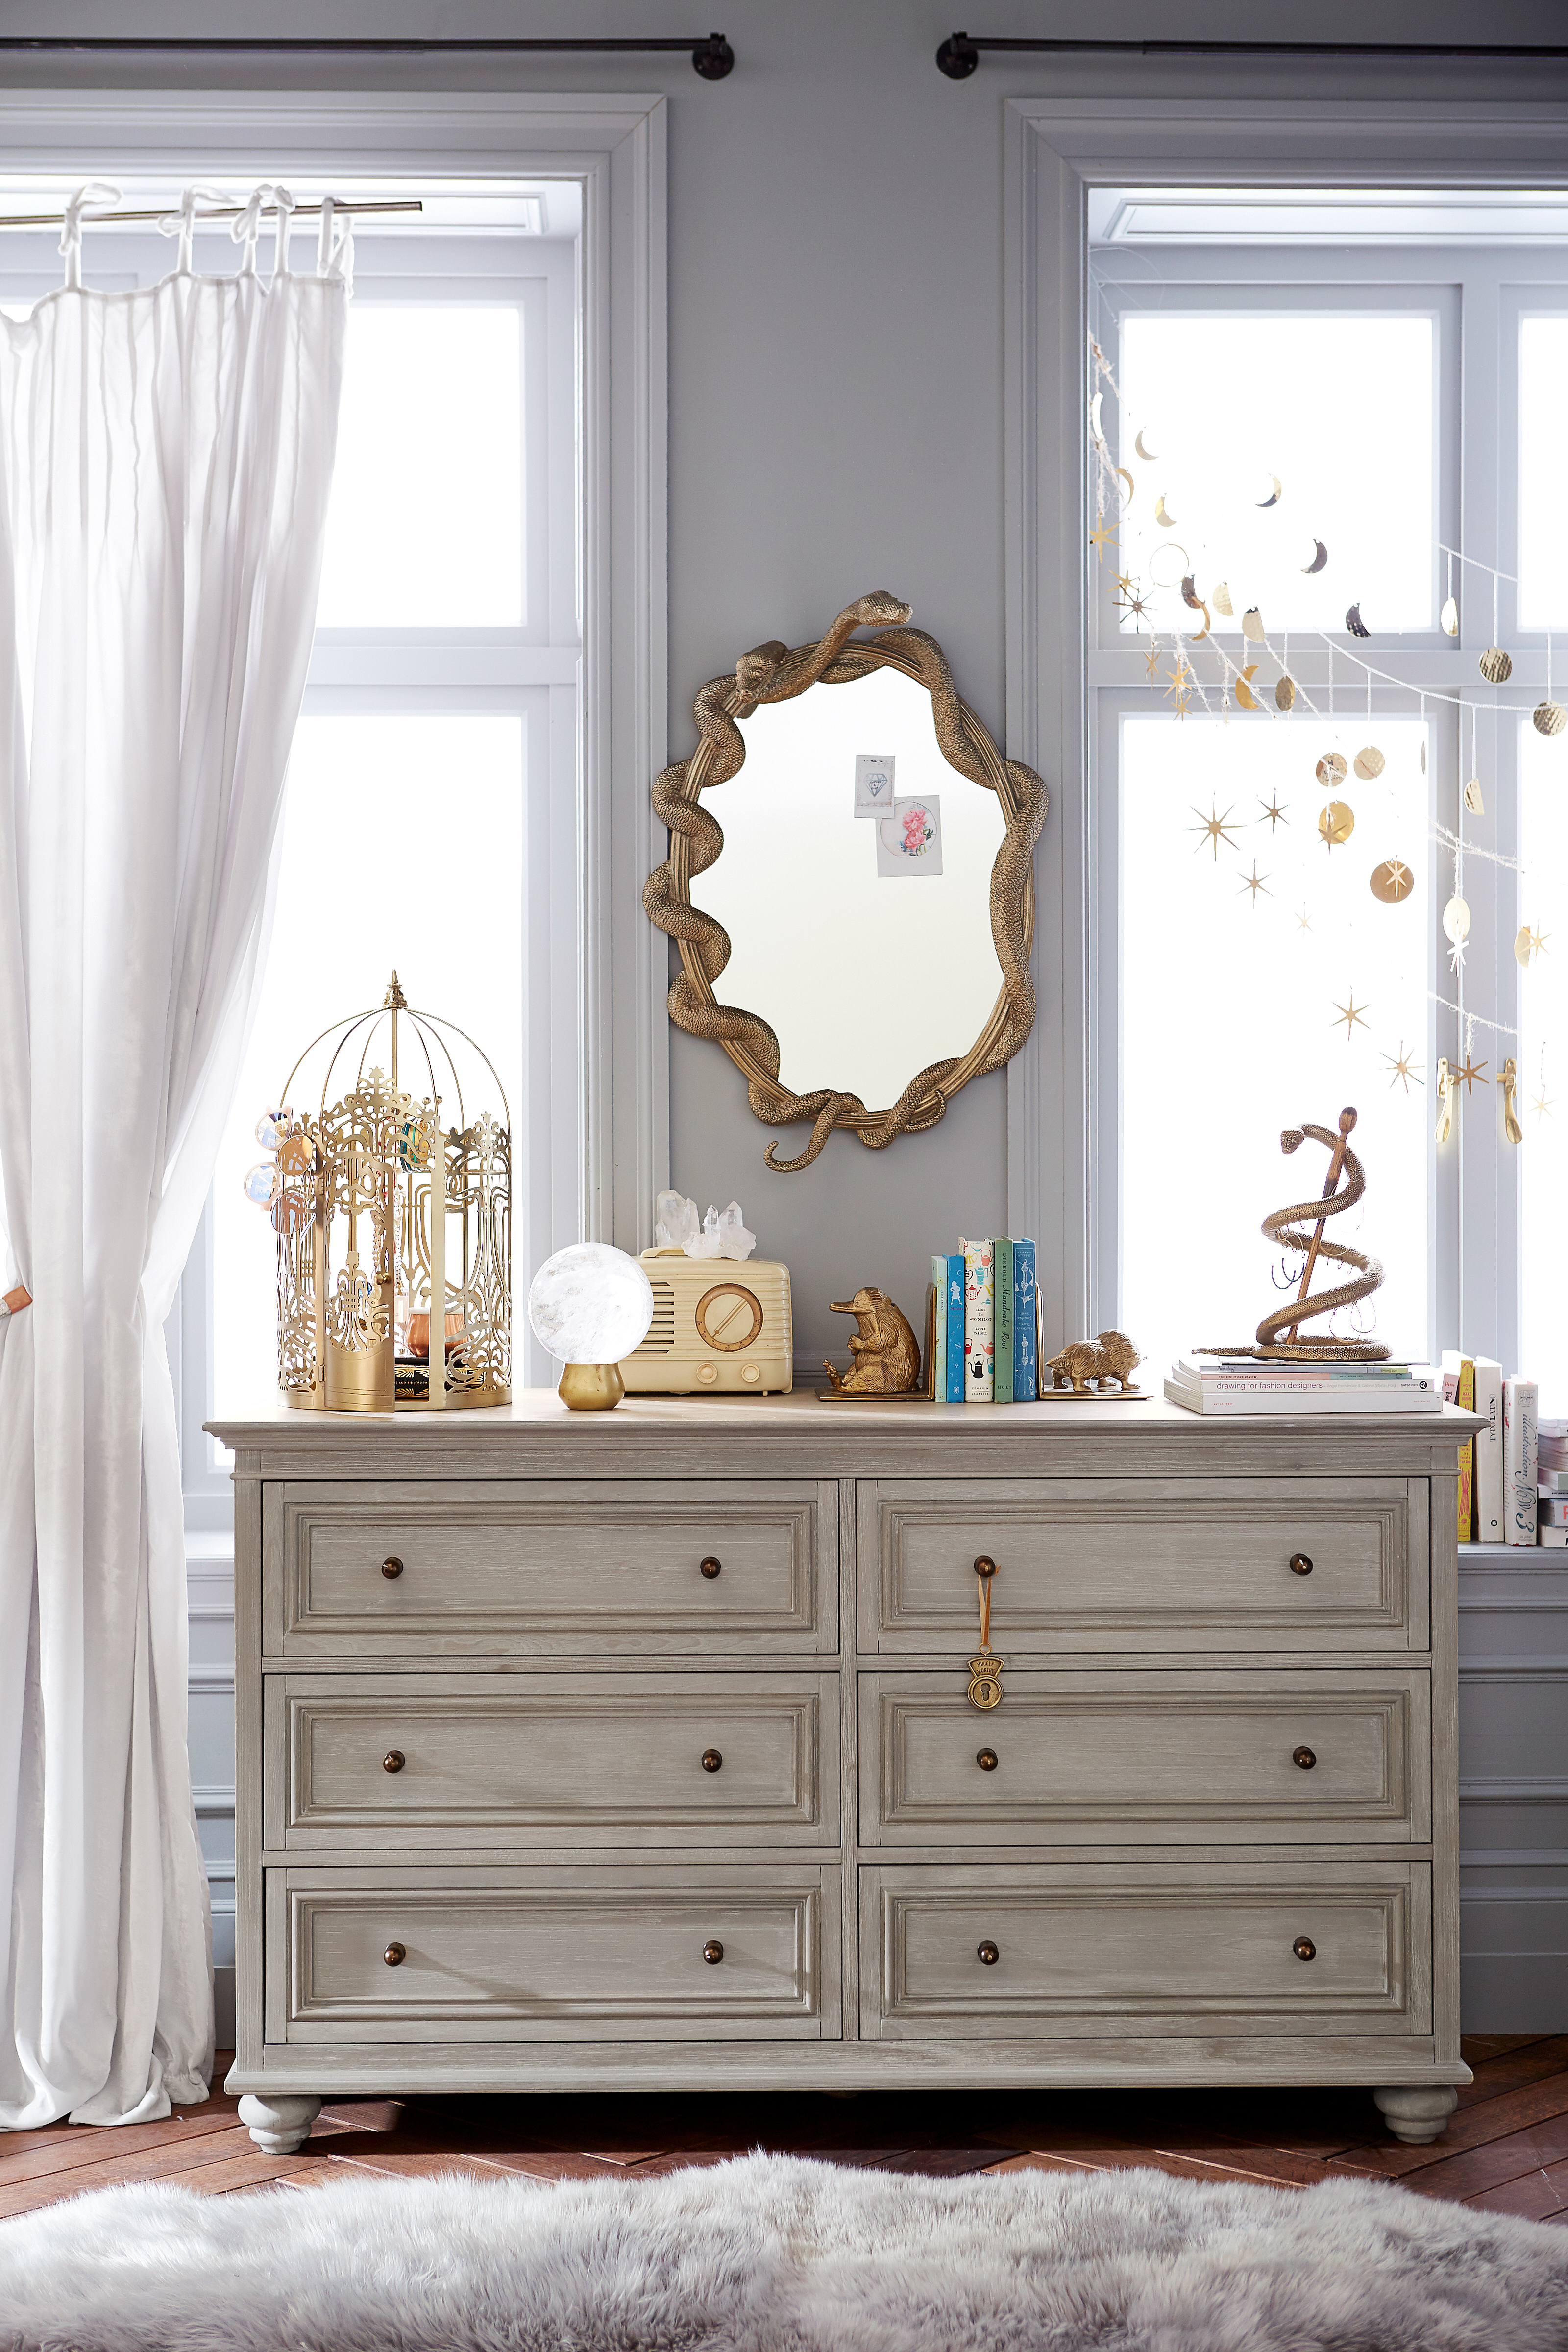 Deck out your whole room with magical gold pieces.